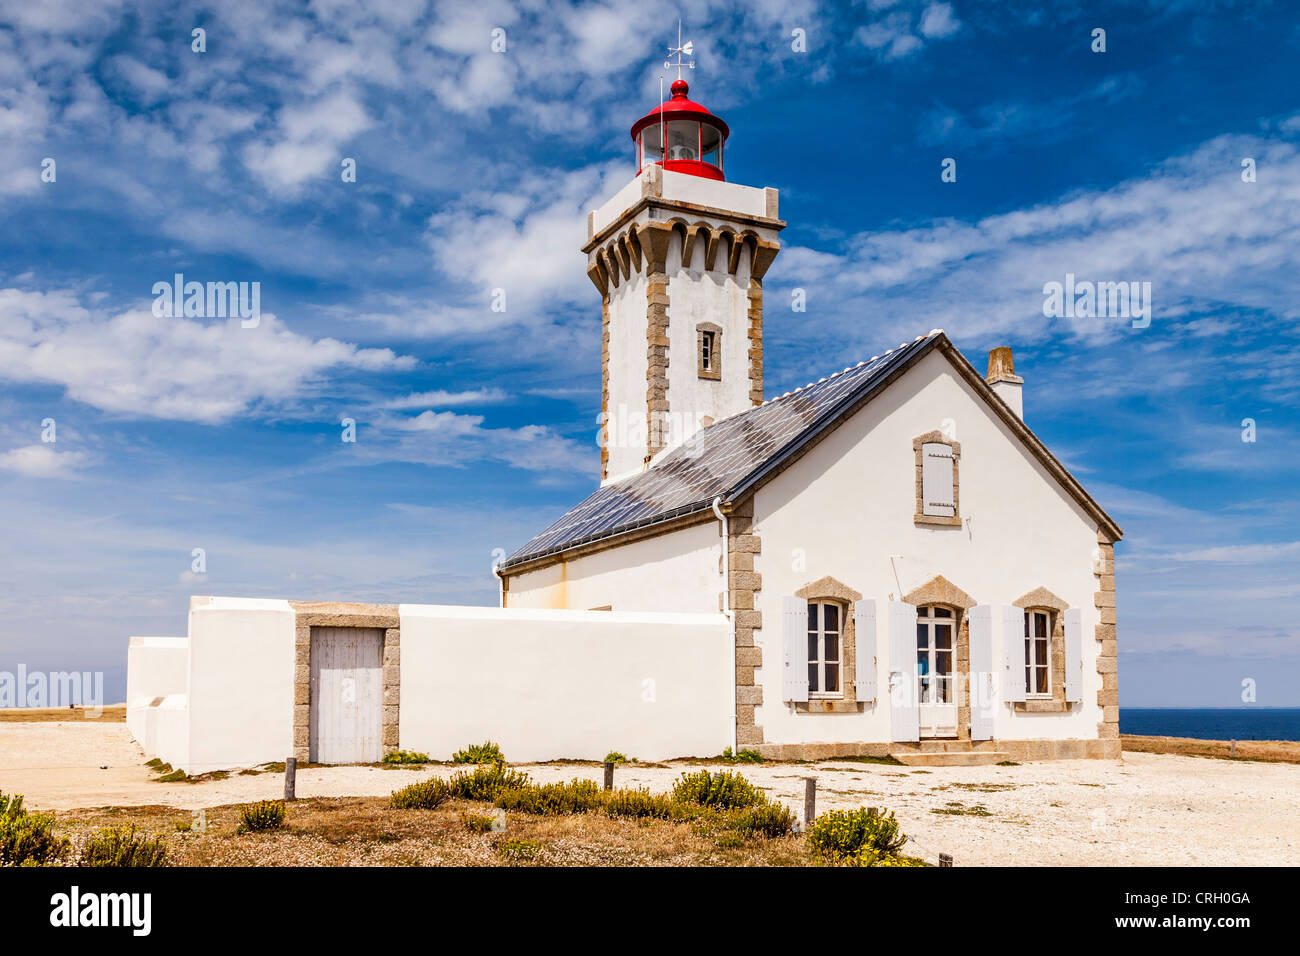 The lighthouse at Les Poulins, Belle-Ile, Brittany, France, one of Brittany's most famous lighthouses, on a fine summer day. Stock Photo